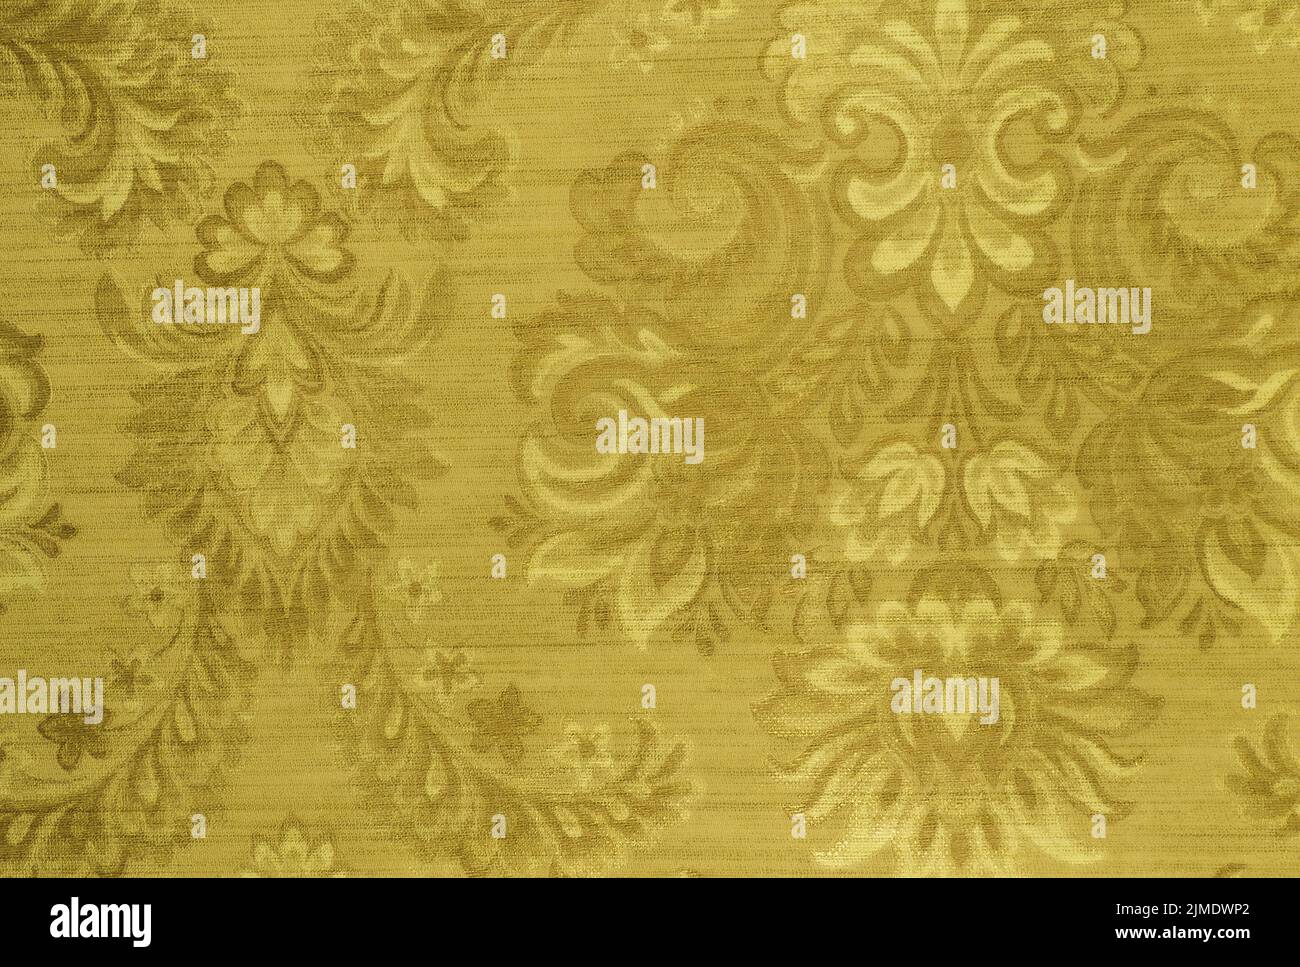 Vintage Fashionable Wallpaper or Textile Texture with Floral Ornamen Stock Photo